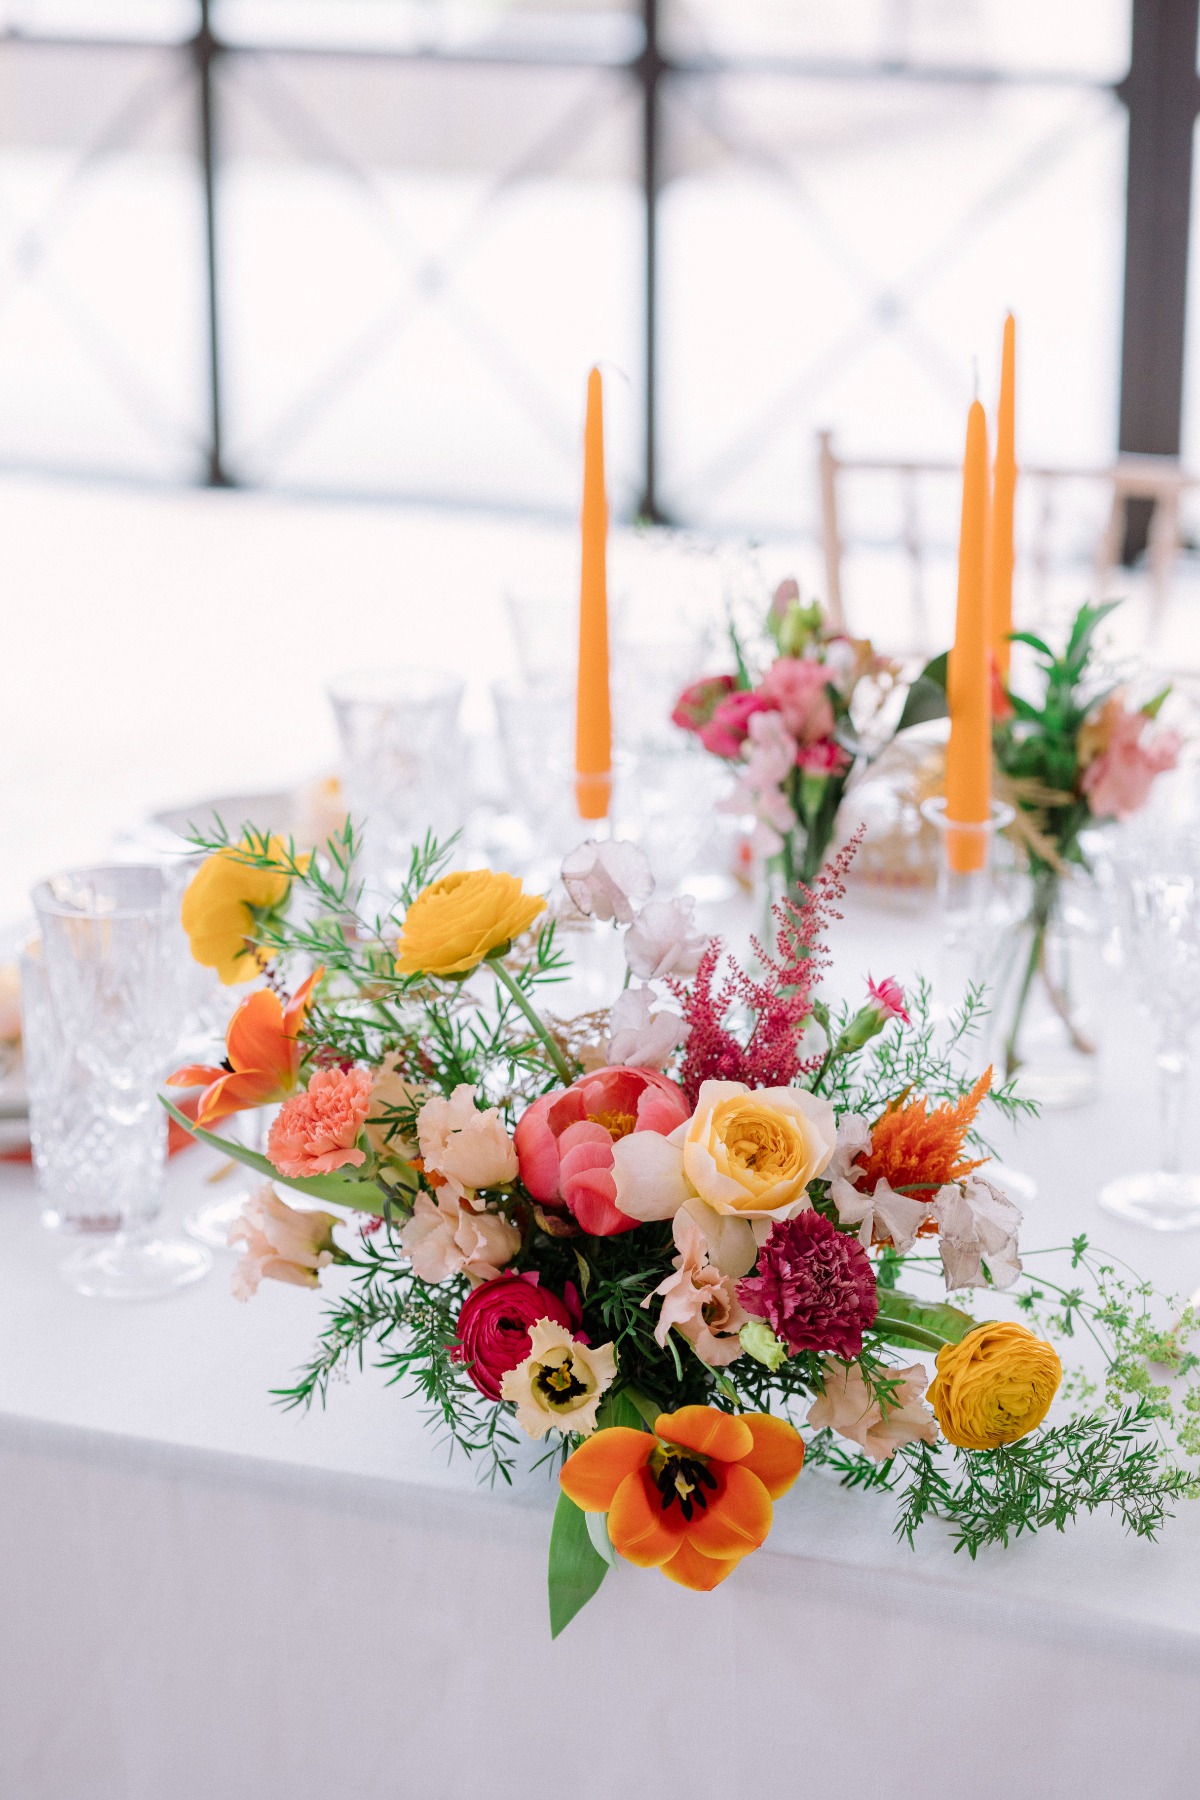 Your Venue Doesn't Dictate Your Color Palette